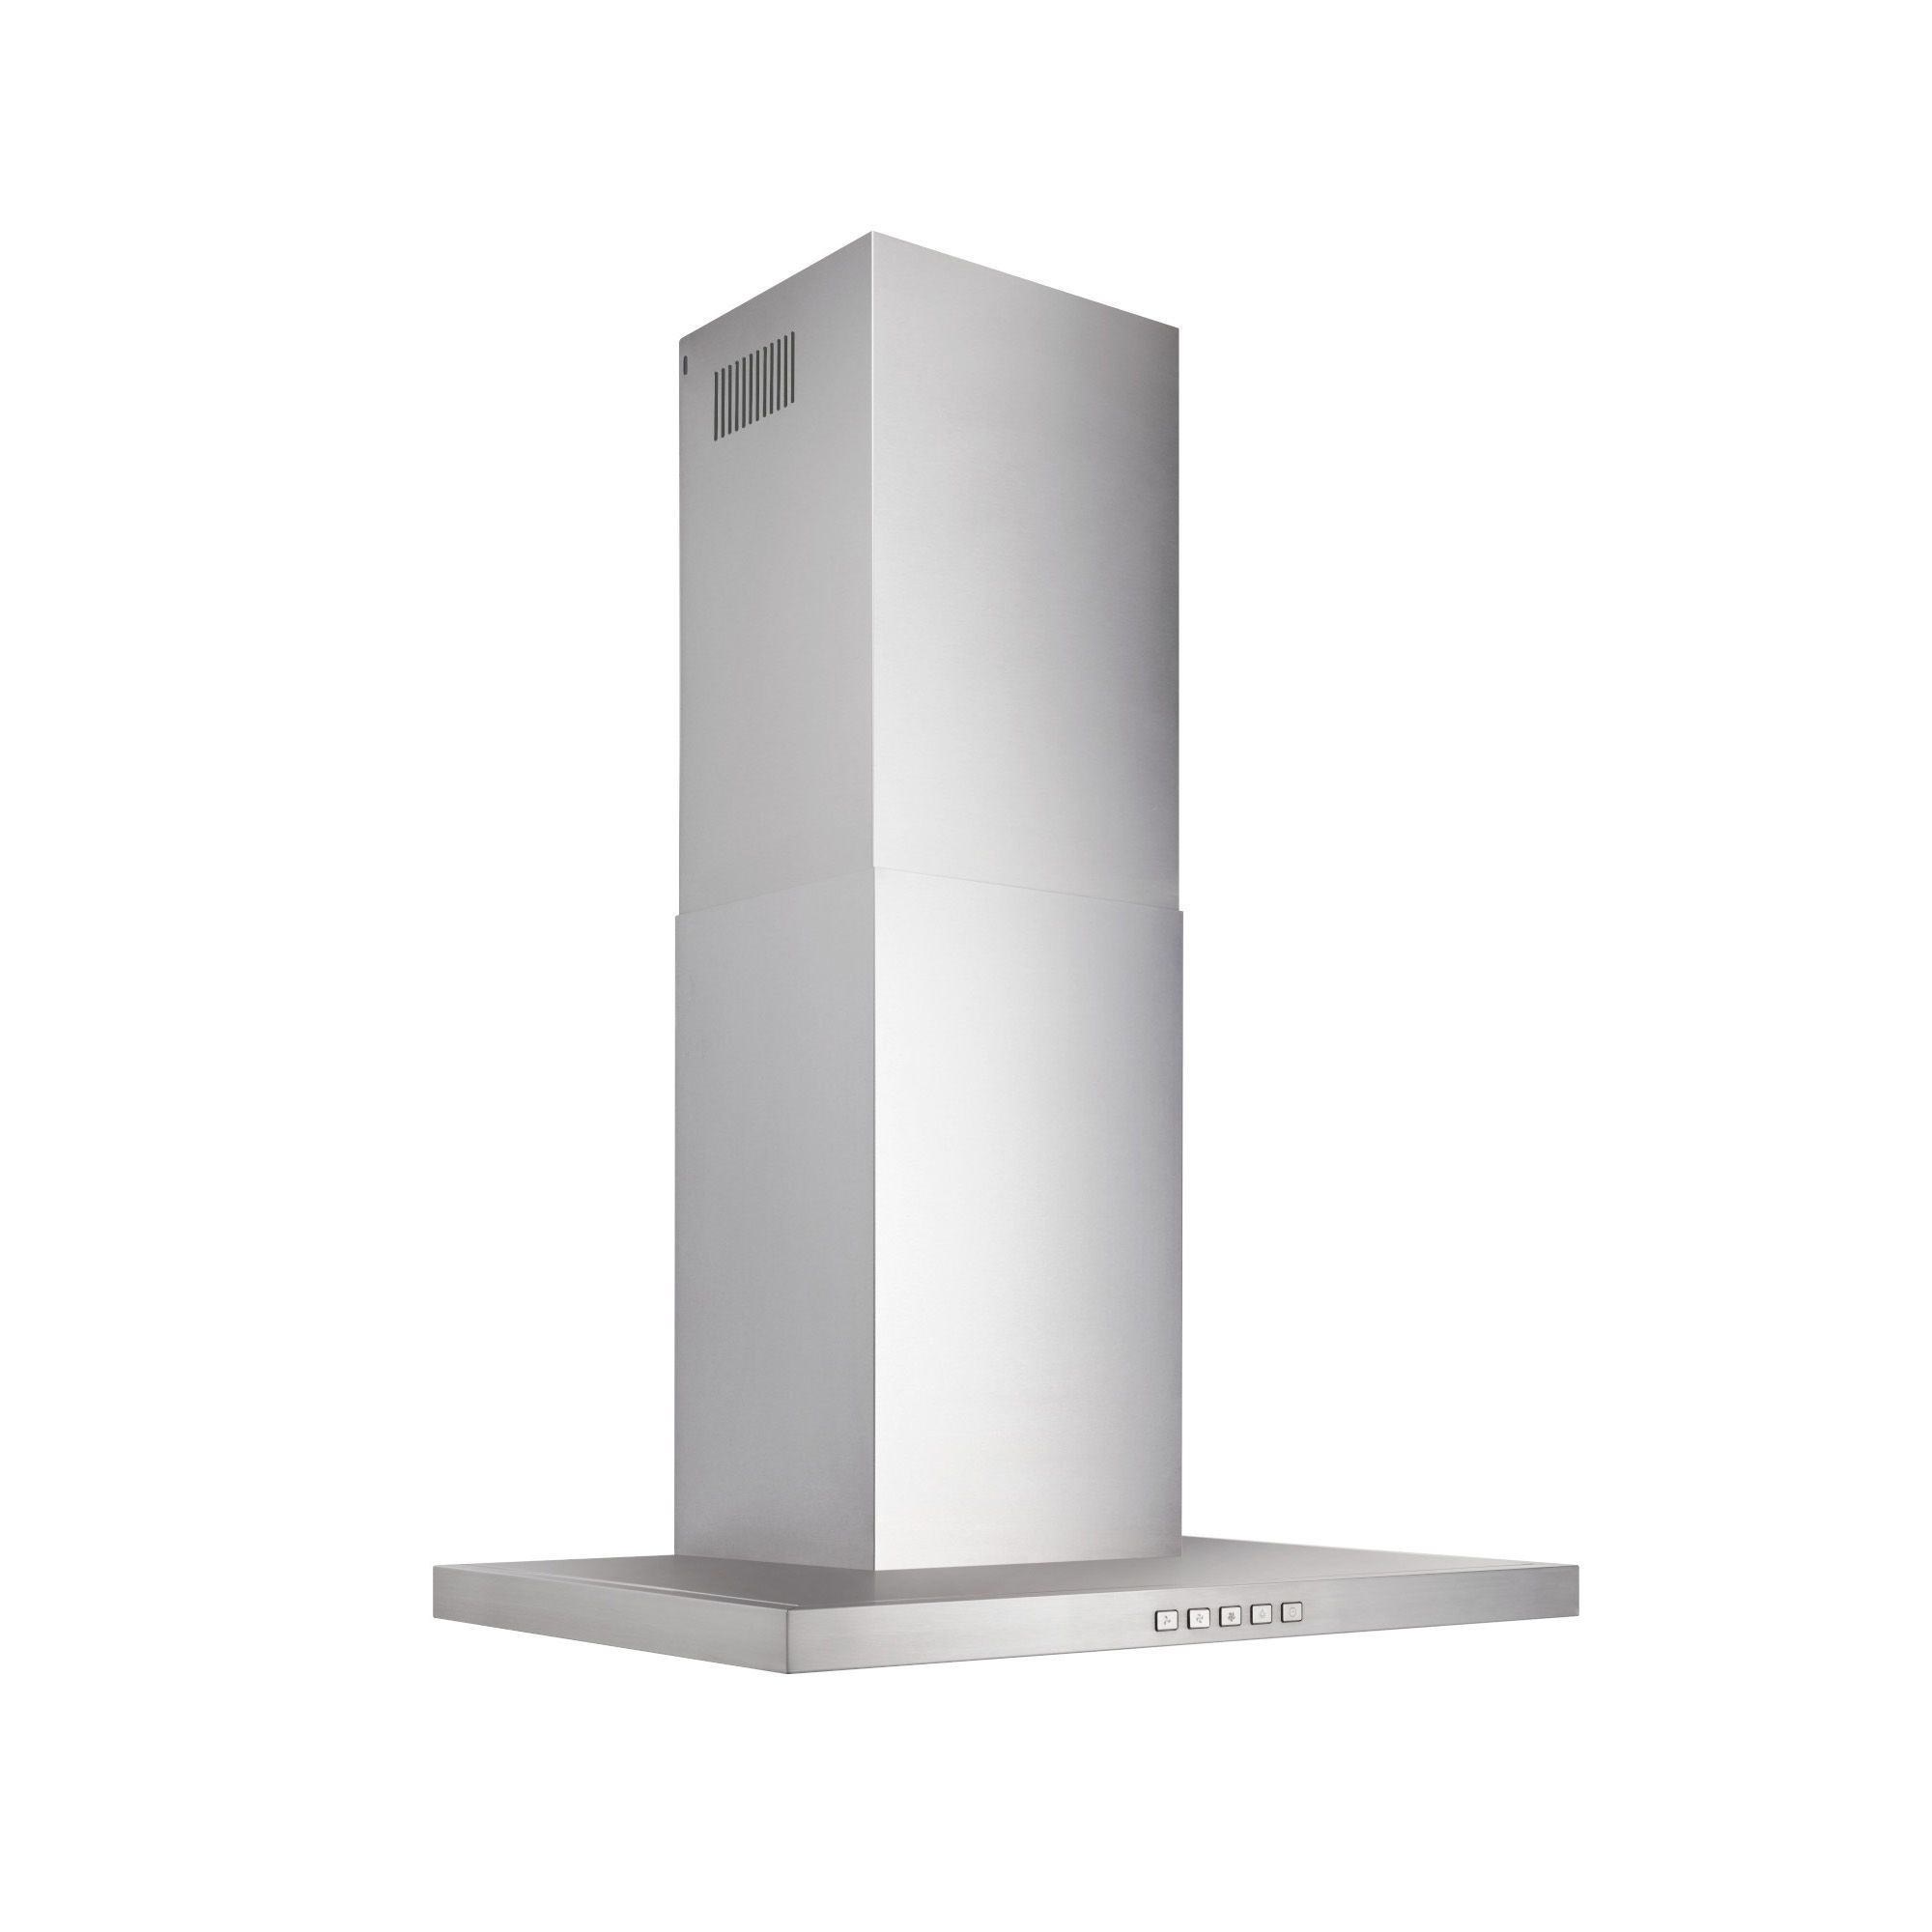 Broan 30-Inch Convertible Wall-Mount T-Style Chimney Range Hood, 450 MAX  CFM, Stainless Steel from BROAN-NUTONE BMR